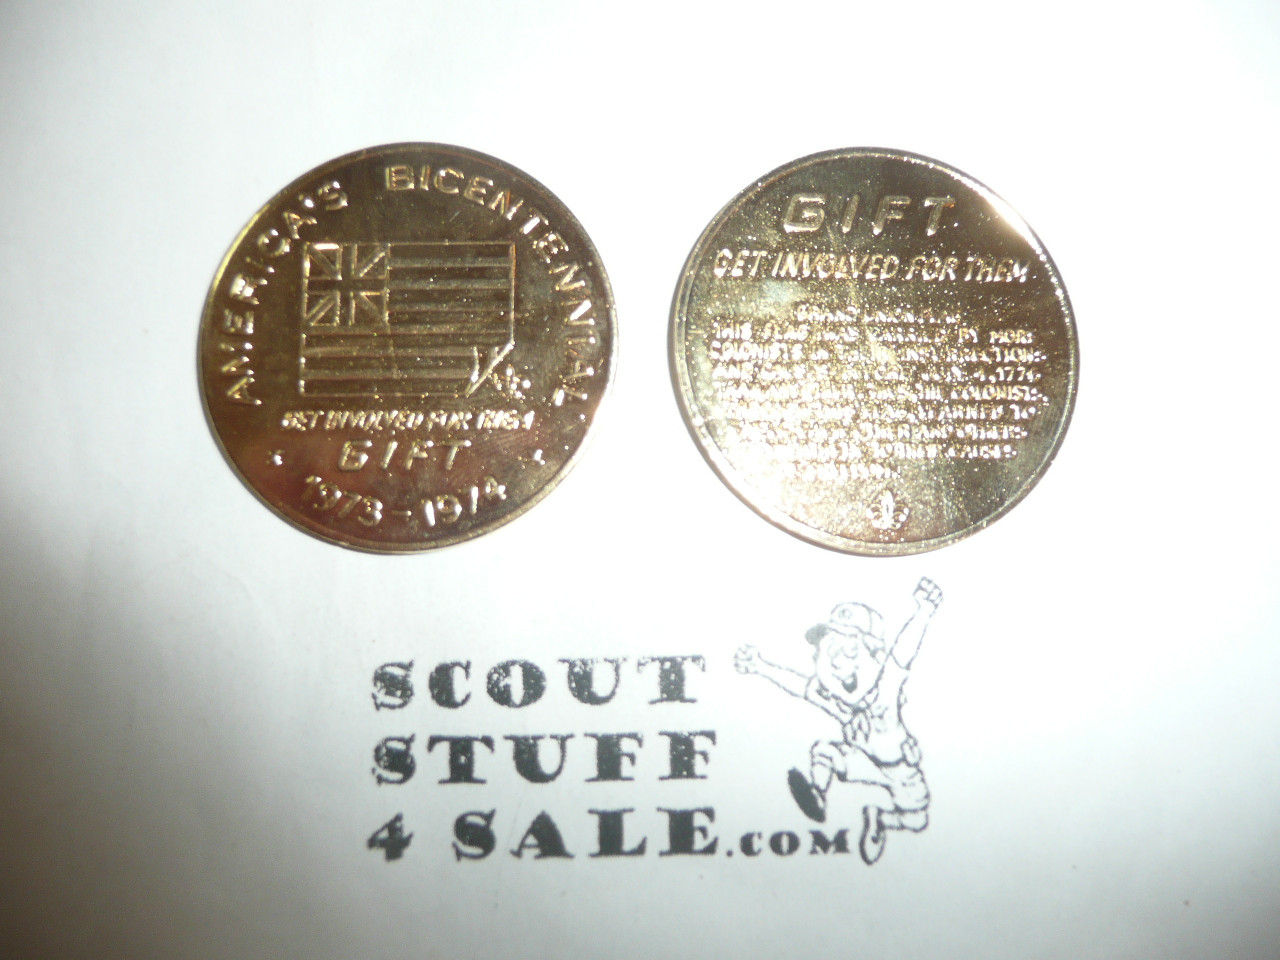 1976 Boy Scout Bicentennial Gift Coin / Token, Get Involved for Them, gold color